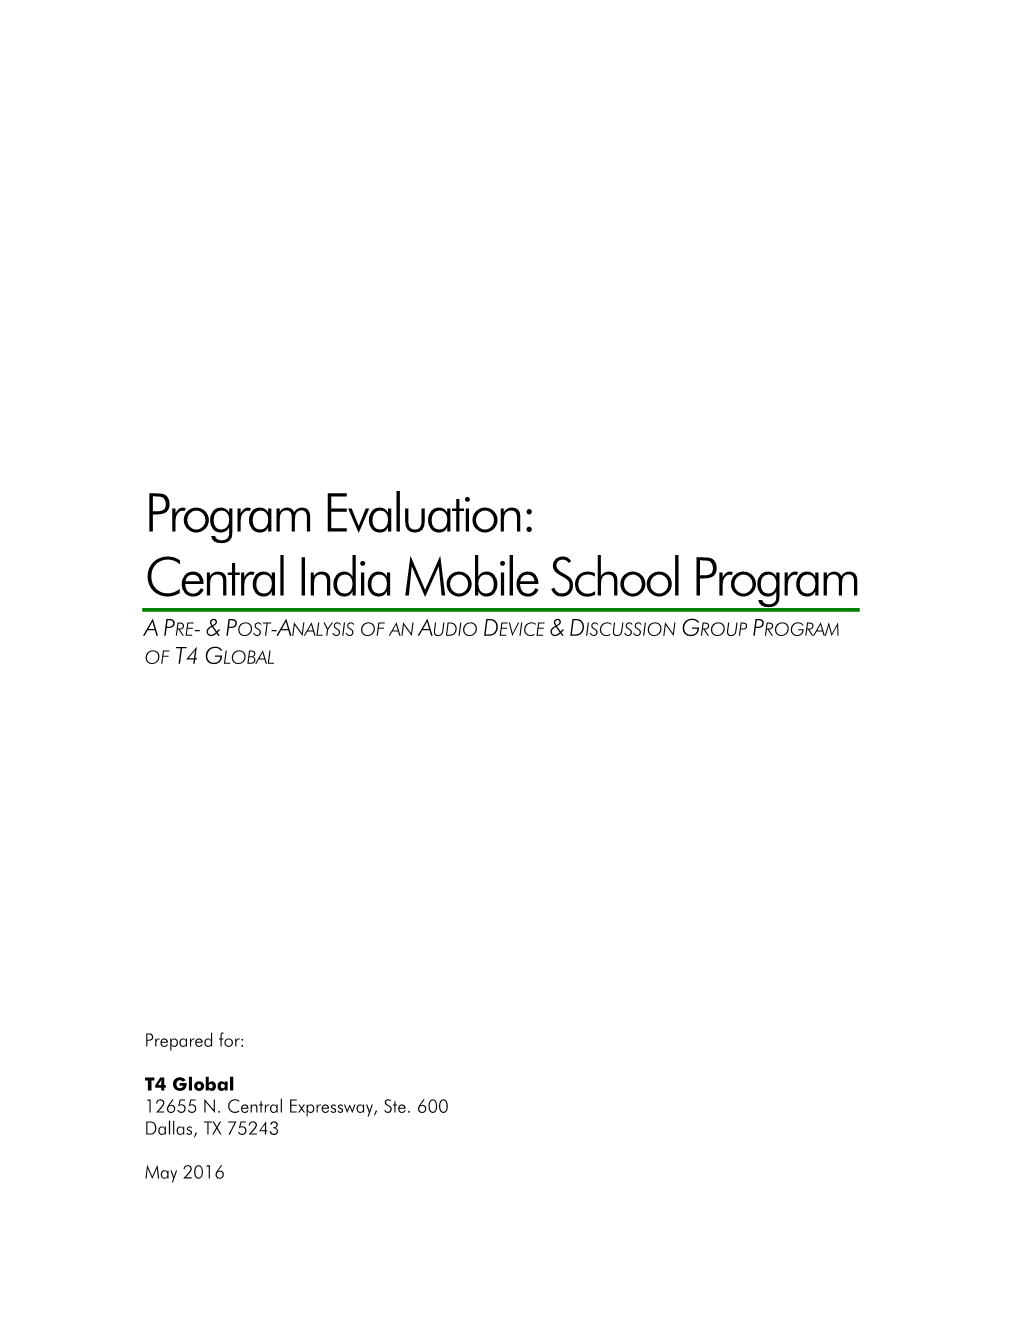 Program Evaluation: Central India Mobile School Program a PRE- & POST-ANALYSIS of an AUDIO DEVICE & DISCUSSION GROUP PROGRAM of T4 GLOBAL